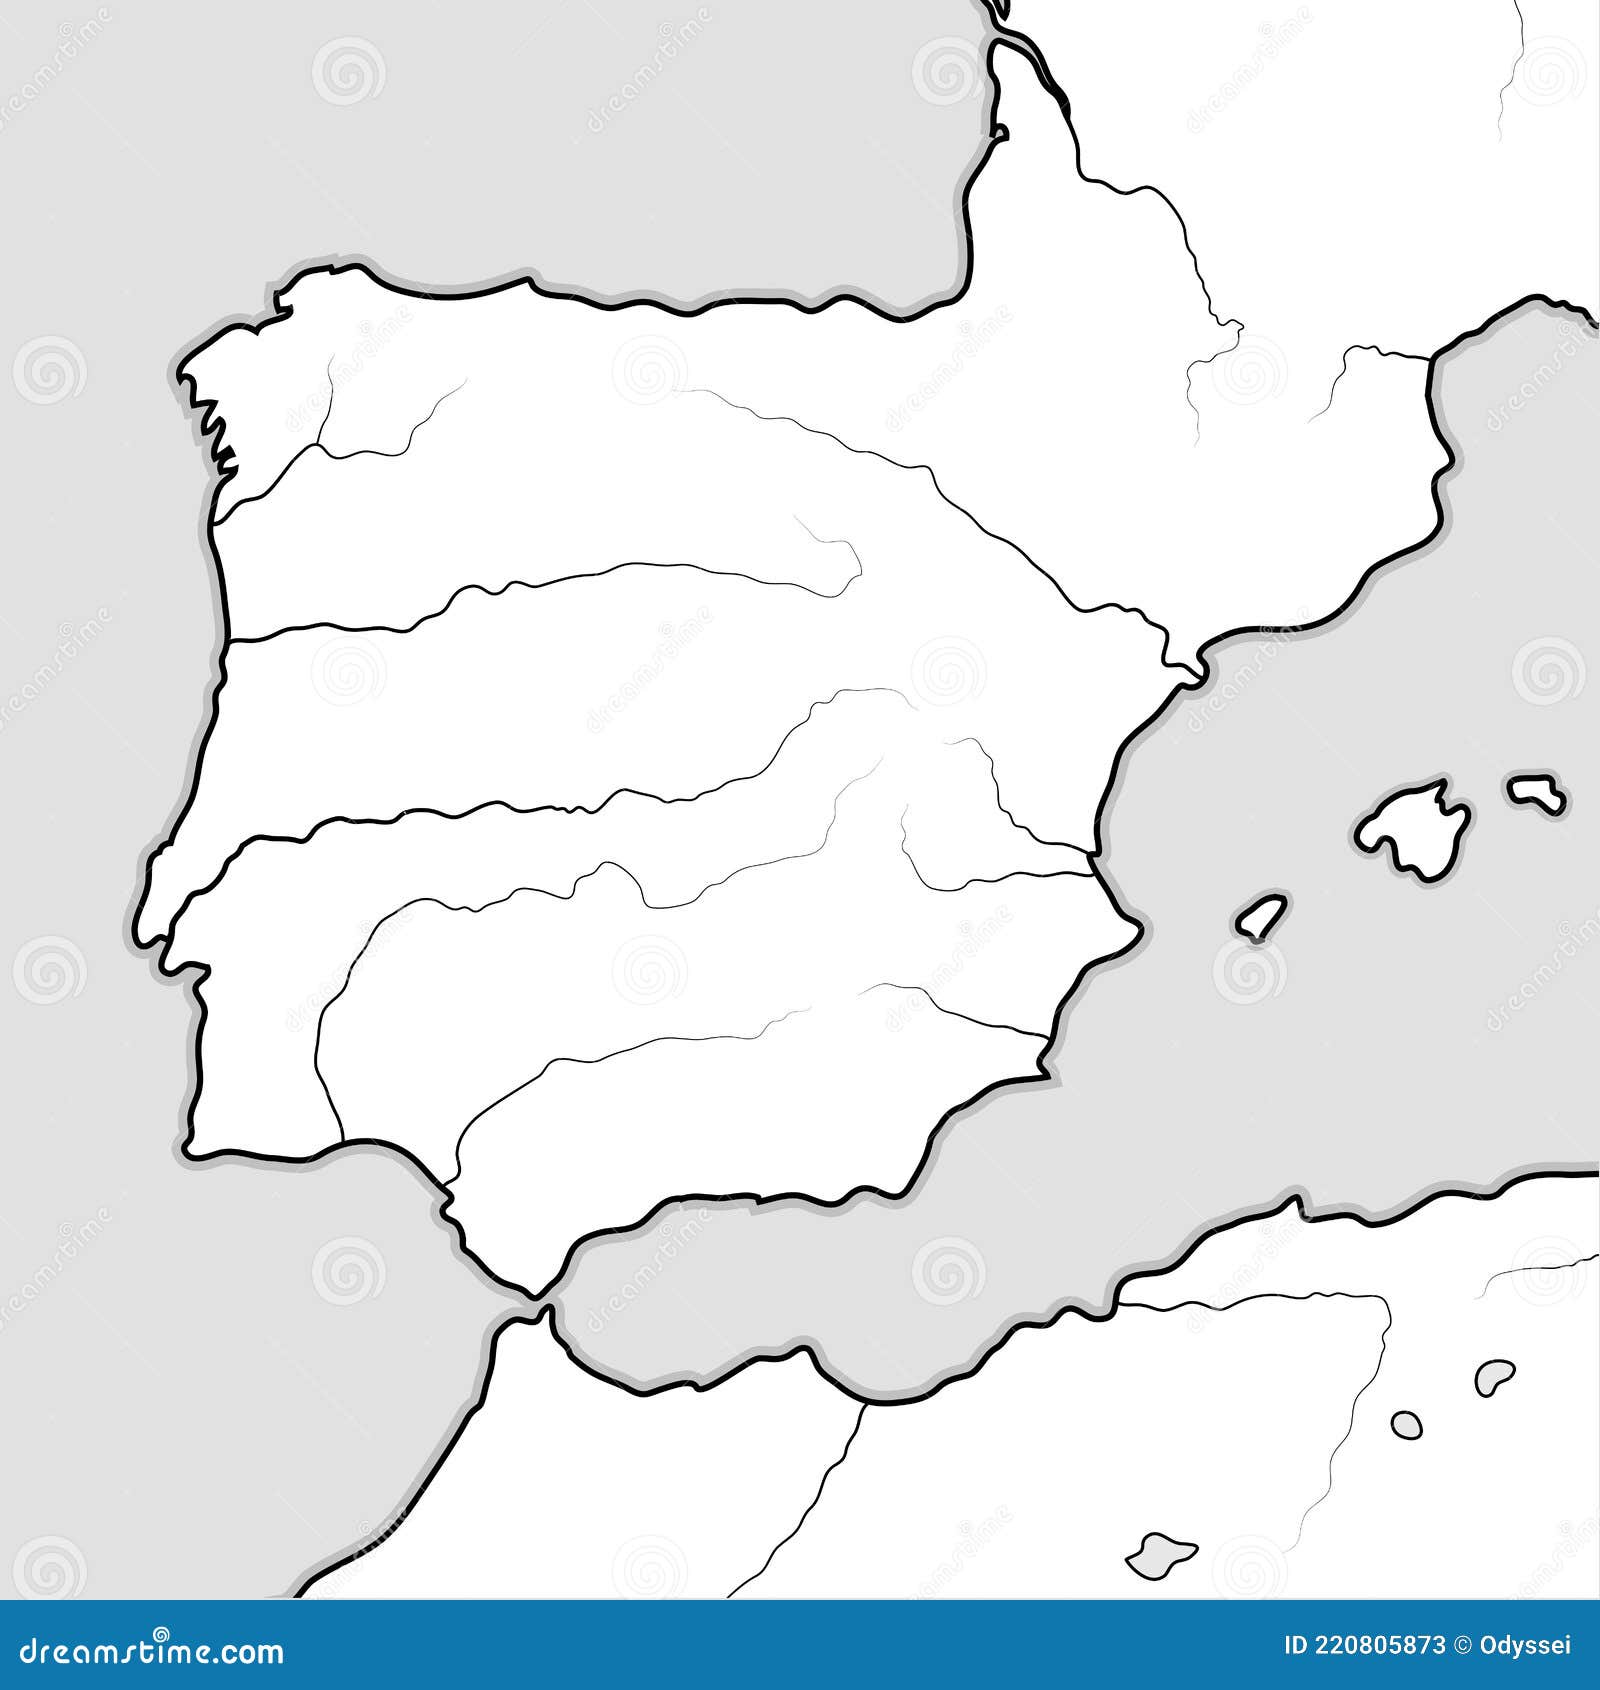 map of the spanish lands: spain, portugal, catalonia, iberia, the pyrenees. geographic chart.